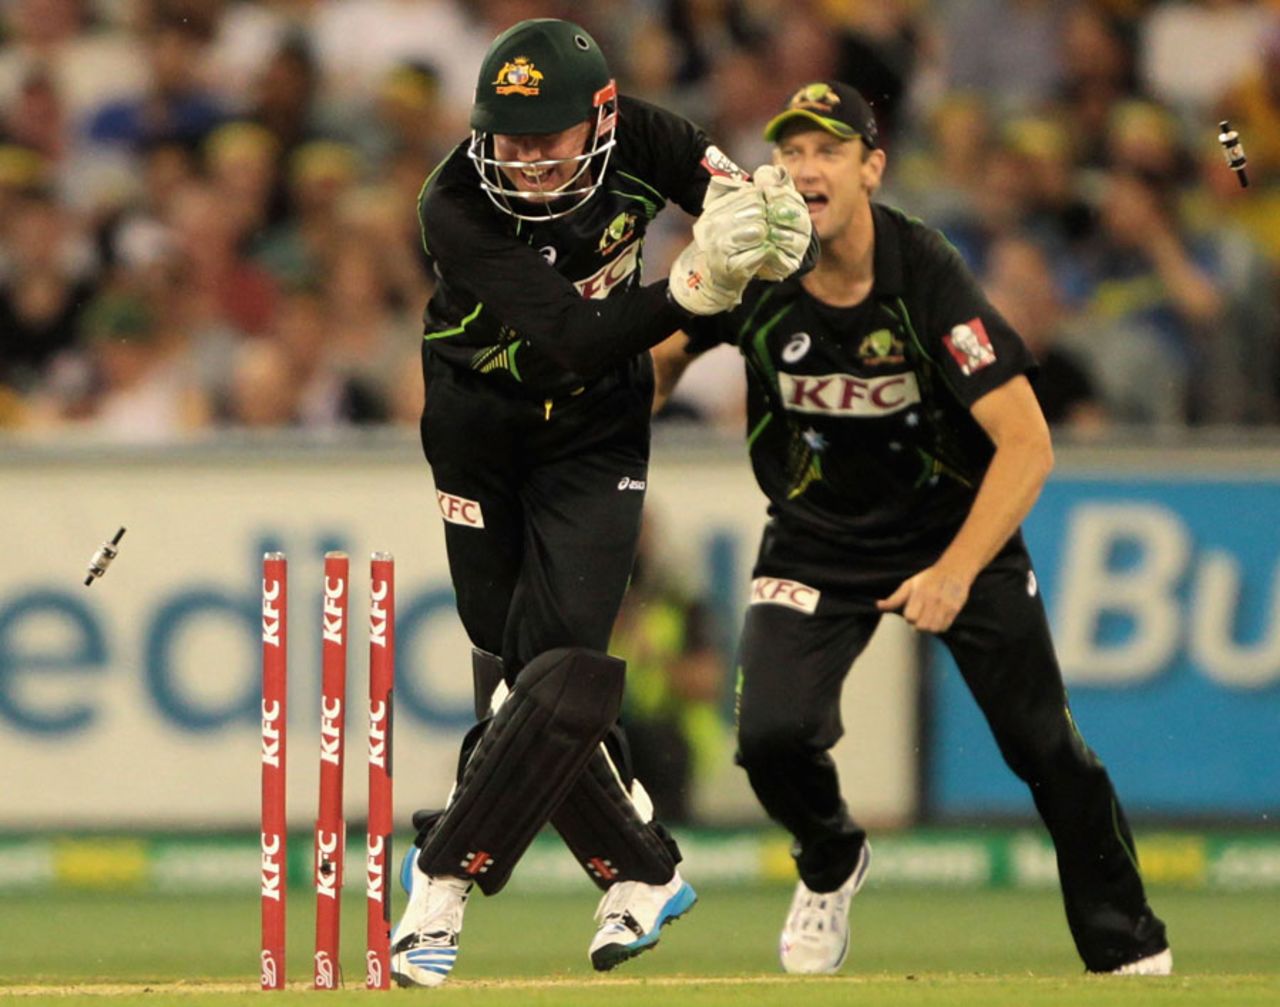 Ben Dunk made two stumpings off Cameron Boyce, Australia v South Africa, 2nd T20, Melbourne, November 7, 2014